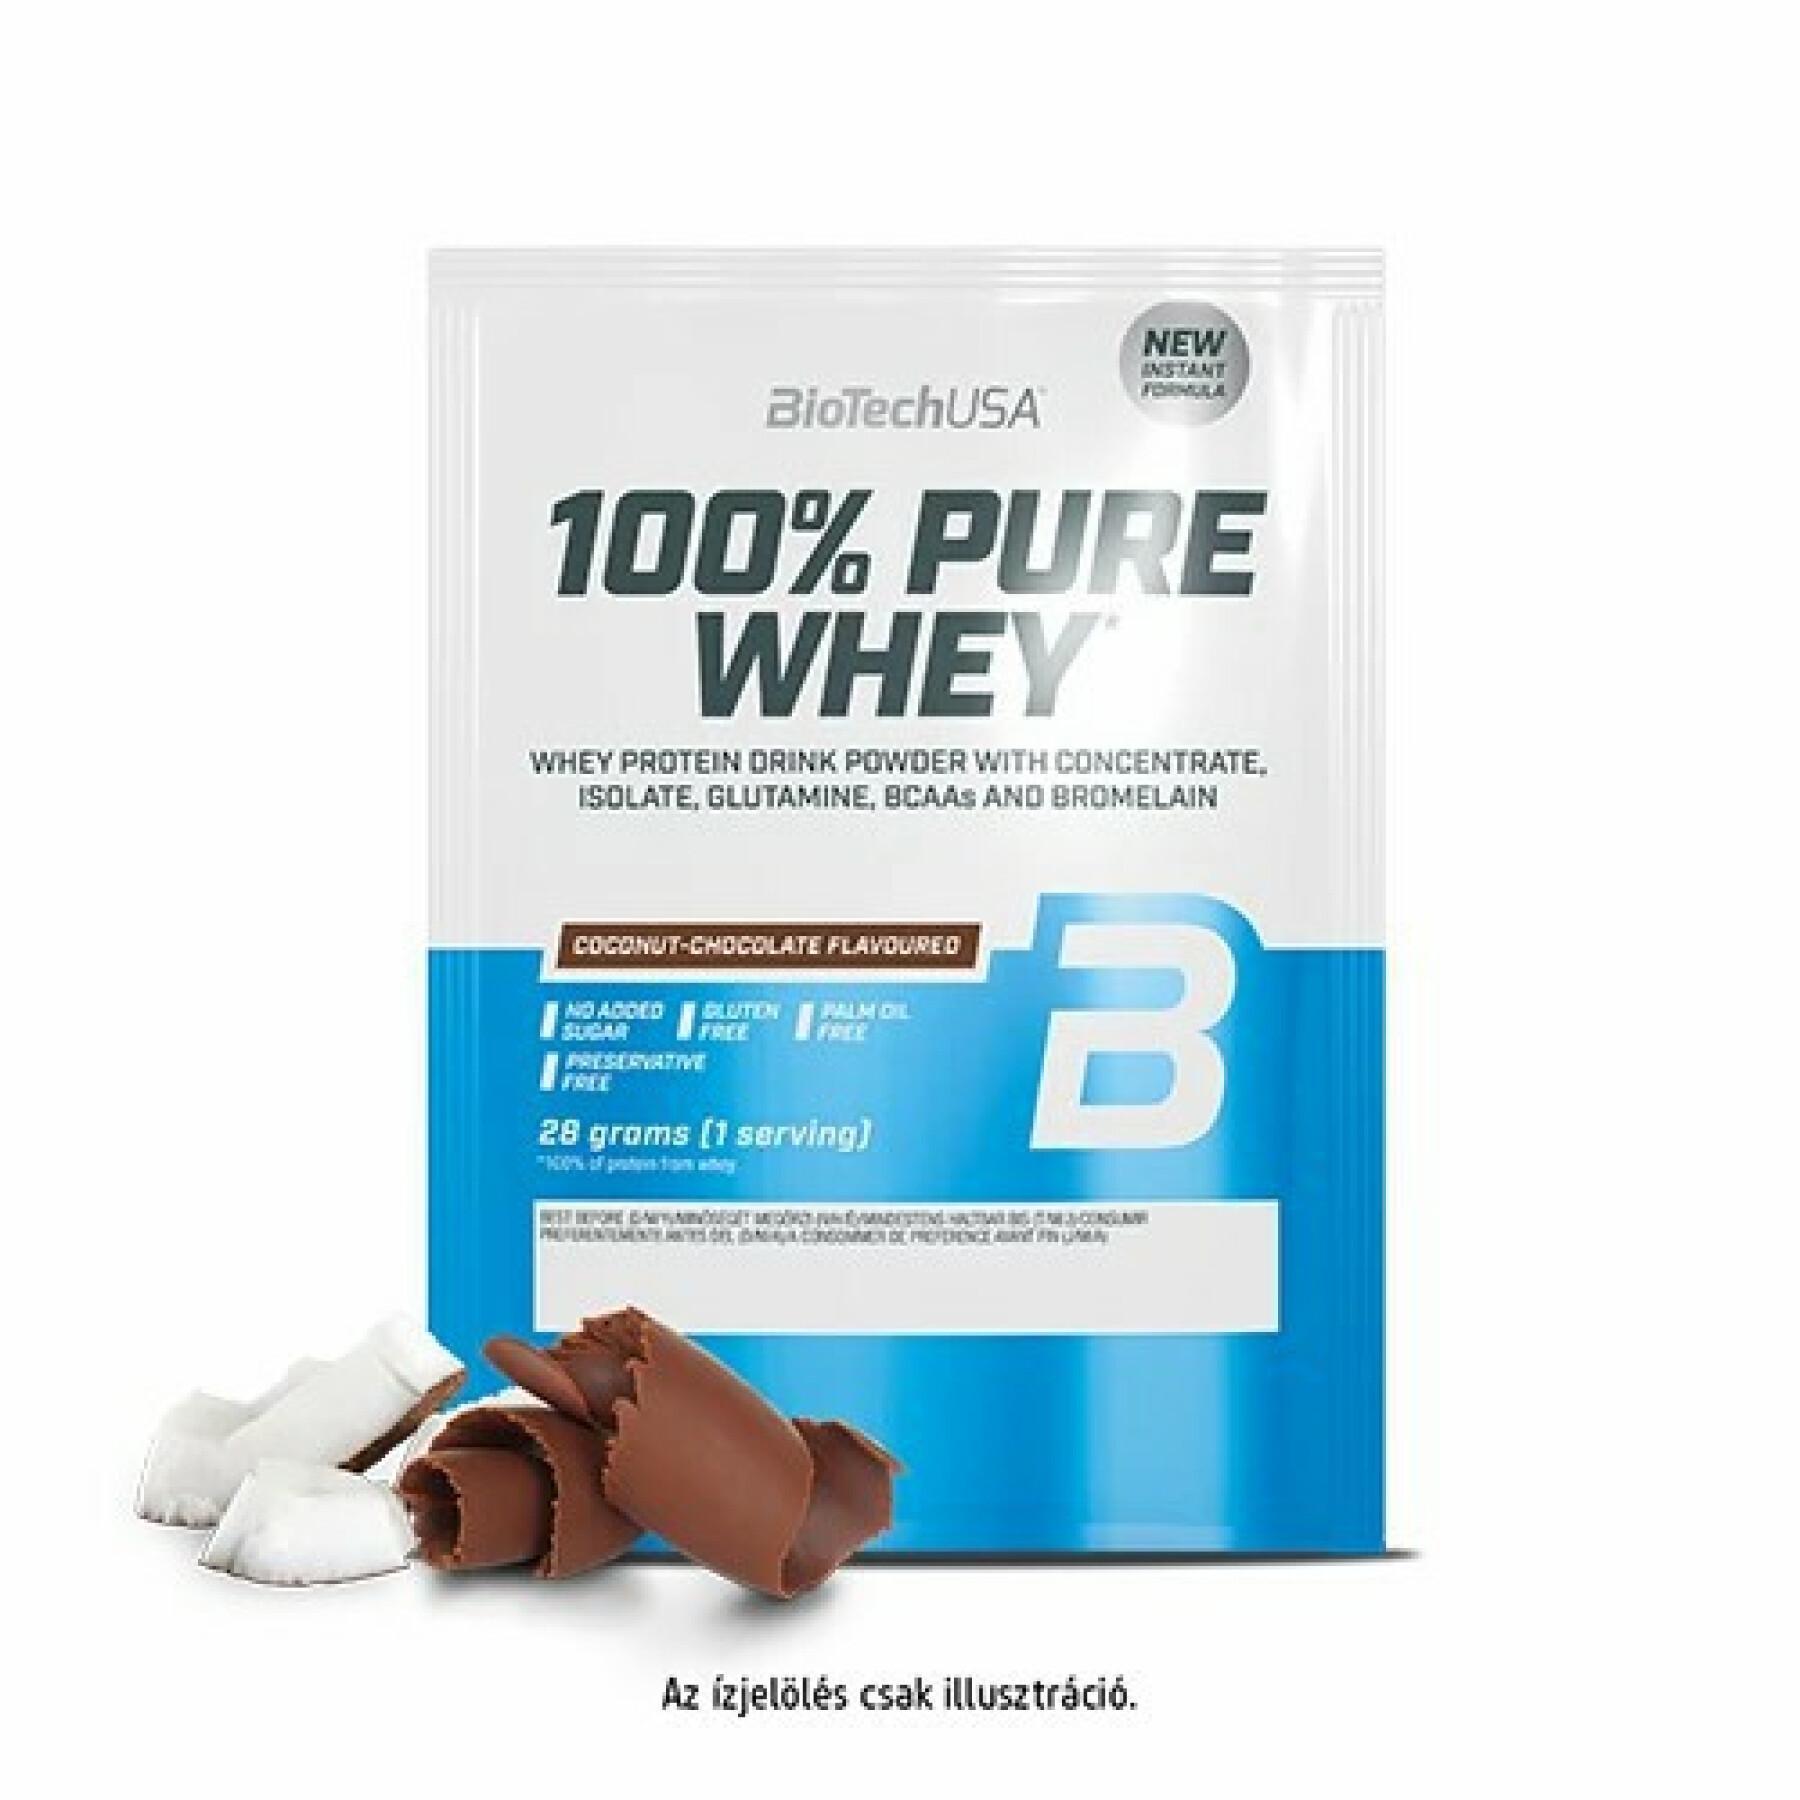 50 packets of 100% pure whey protein Biotech USA - Noix de coco-chocolat - 28g